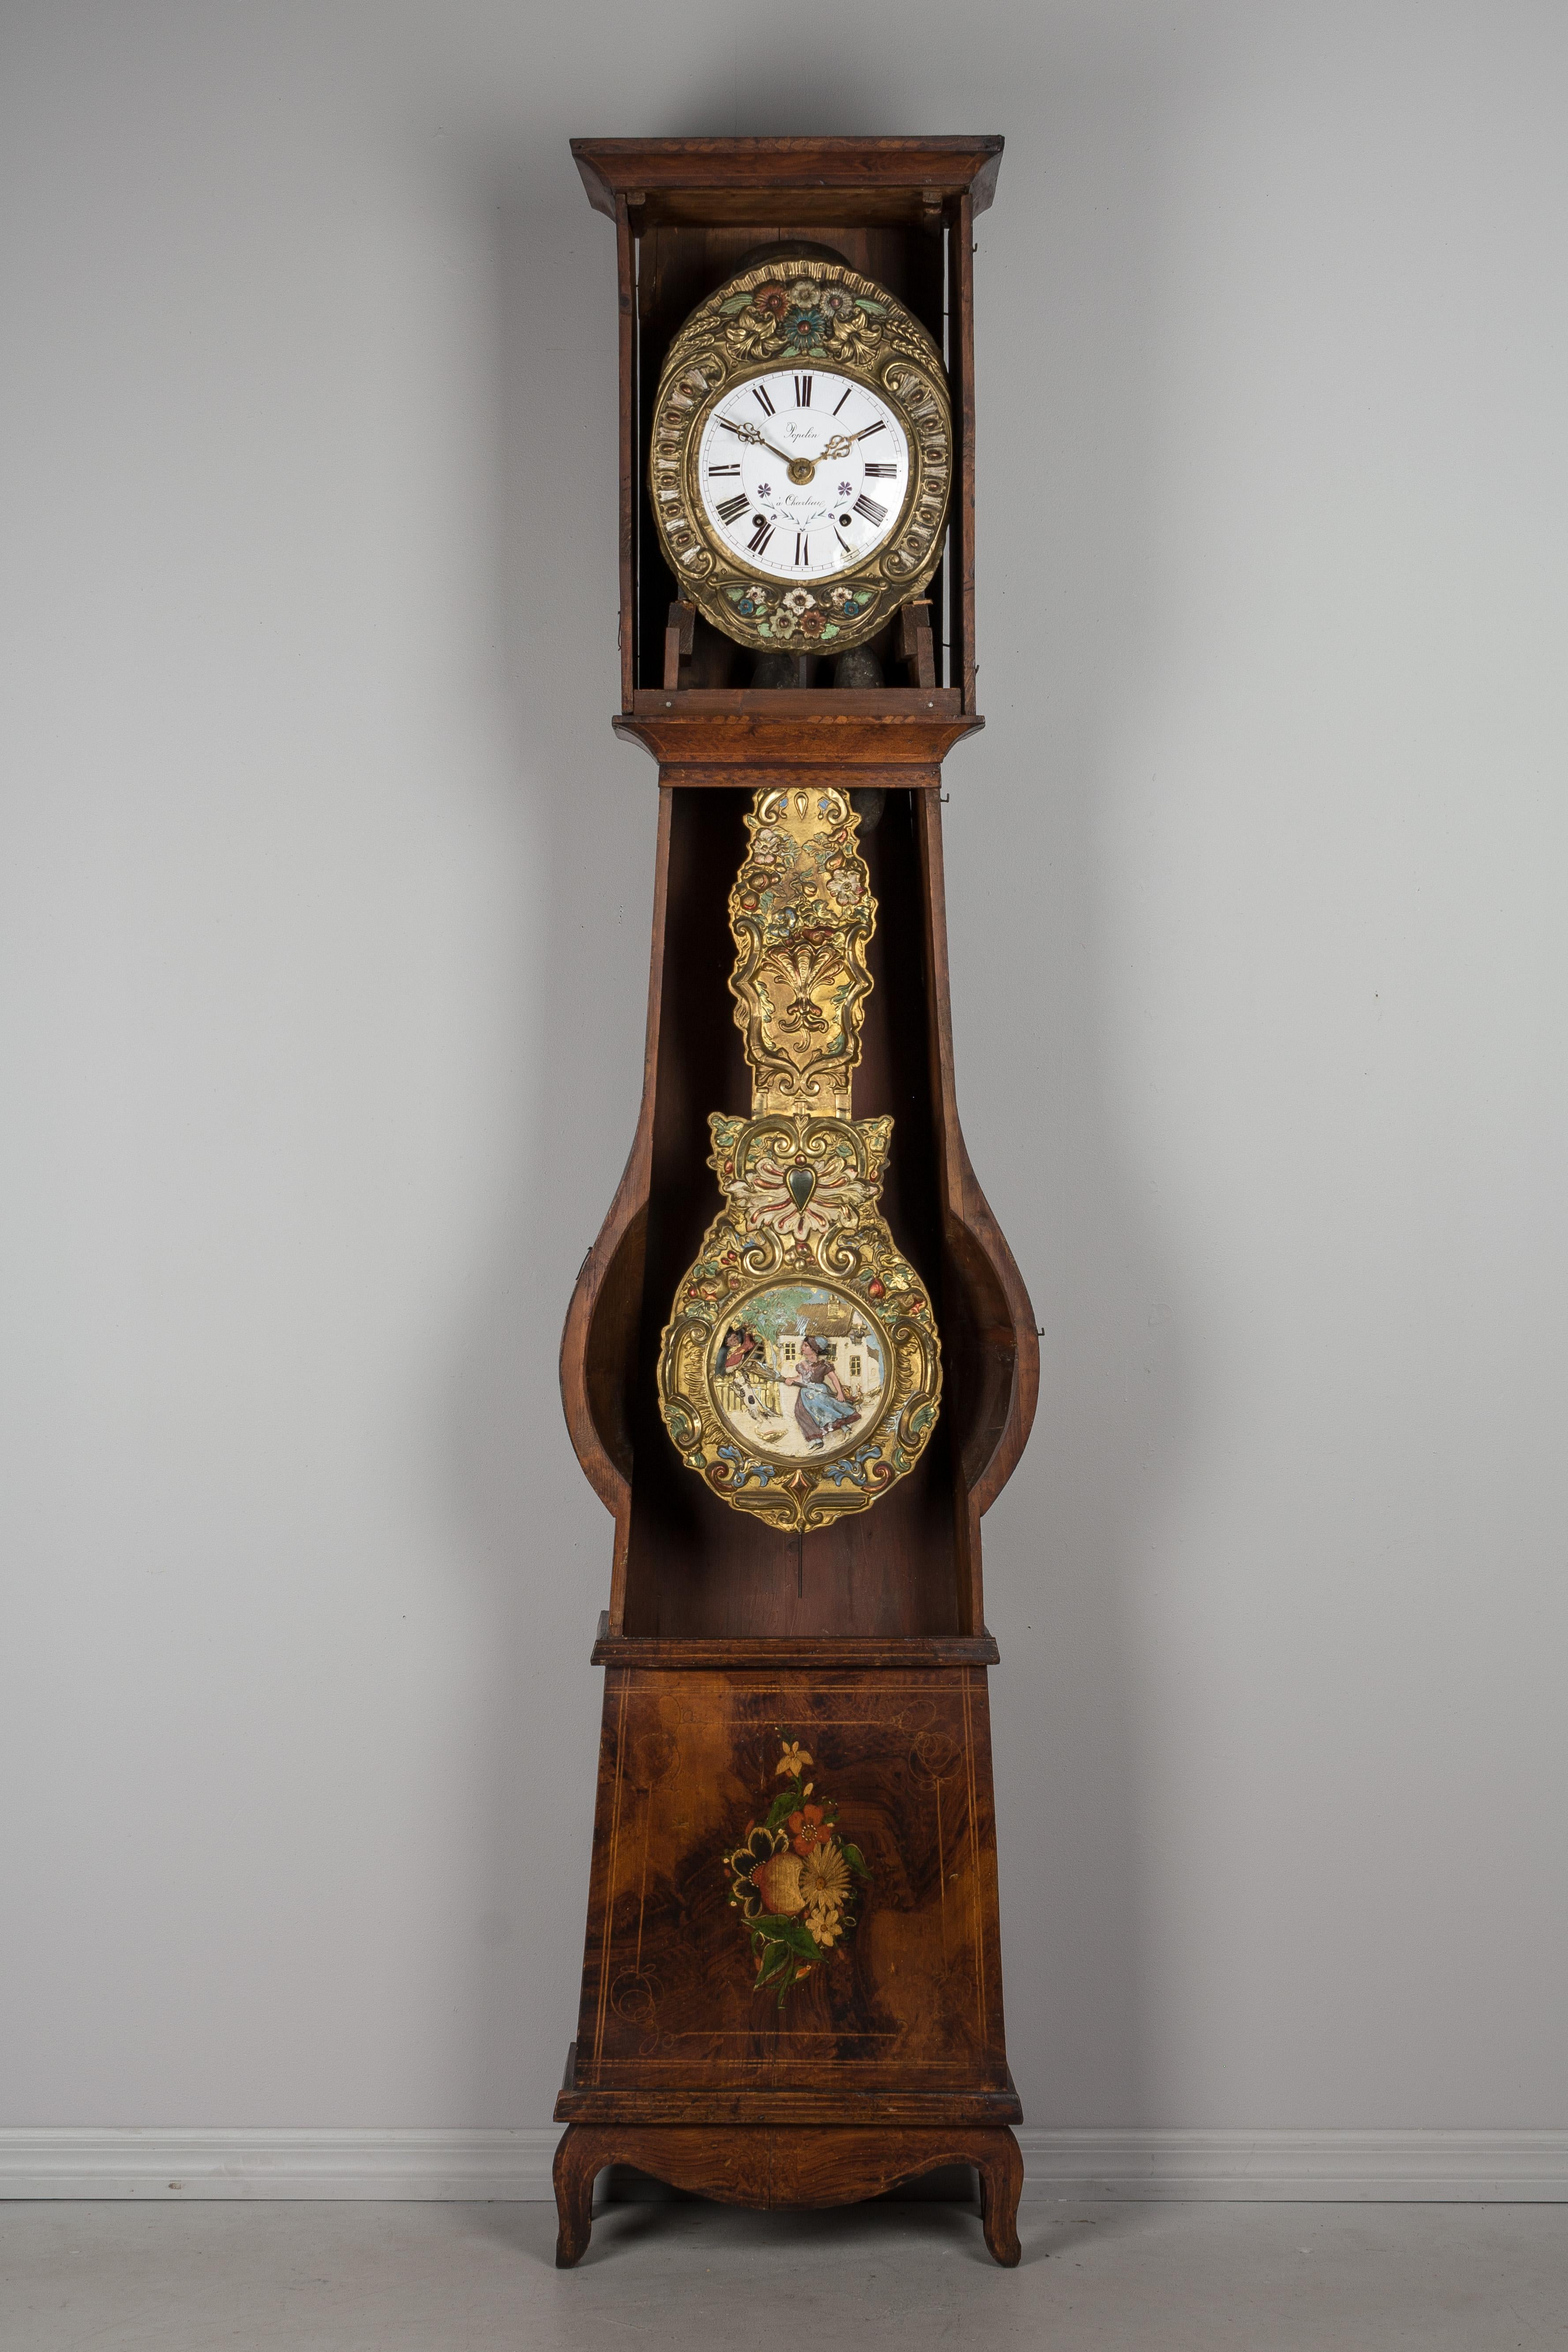 A French country comtoise, or grandfather clock, with polychrome painted pine case and embossed brass pendulum. Original seven day Morbier movement, professionally cleaned and in working order, having an enamel face signed by the clockmaker, Popelin